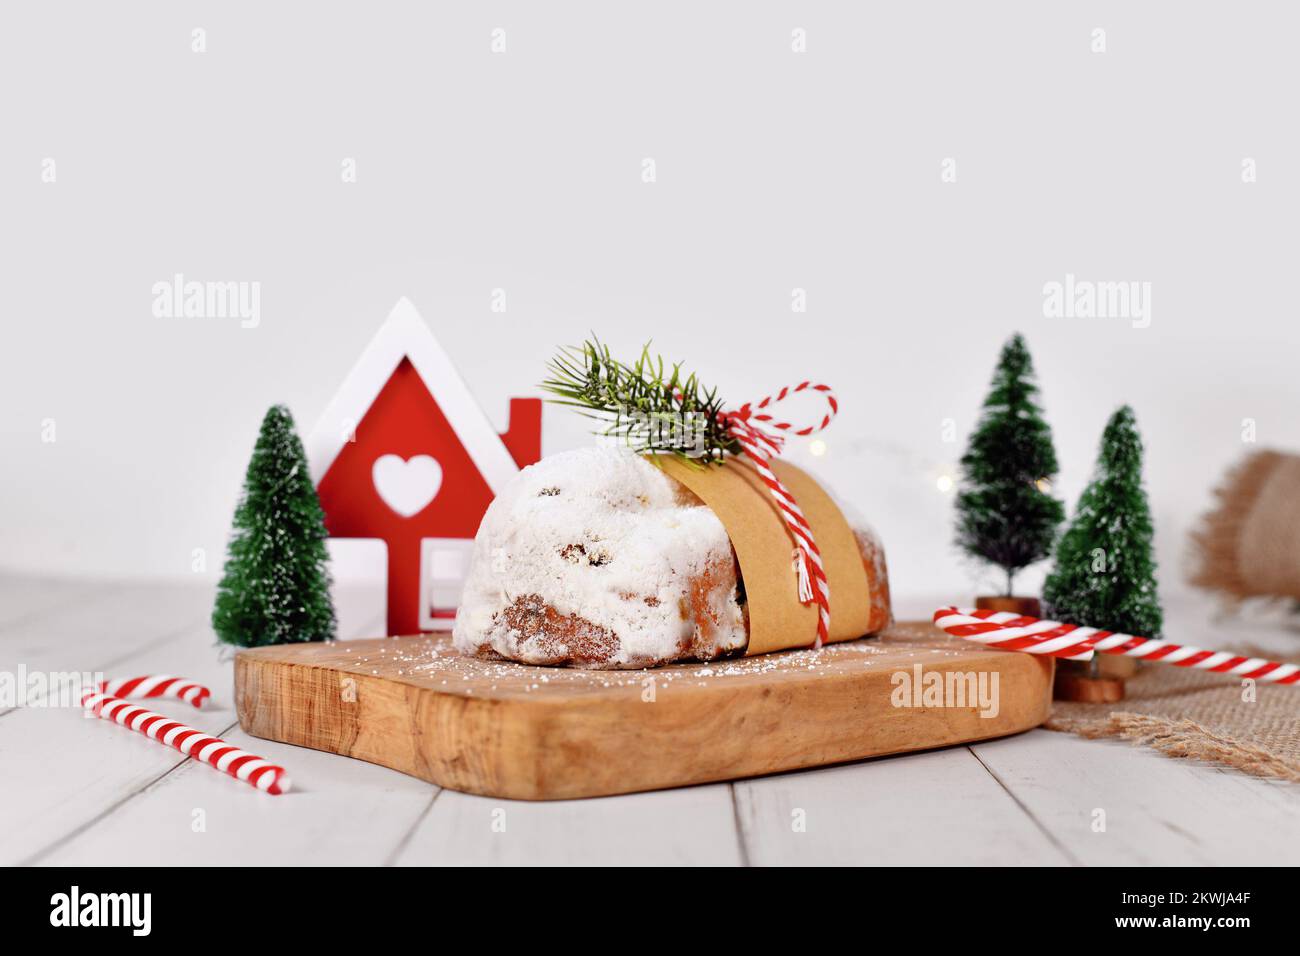 Whole traditional German Stollen cake, a fruit bread with nuts, spices, and dried fruits with powdered sugar, served during Christmas time Stock Photo